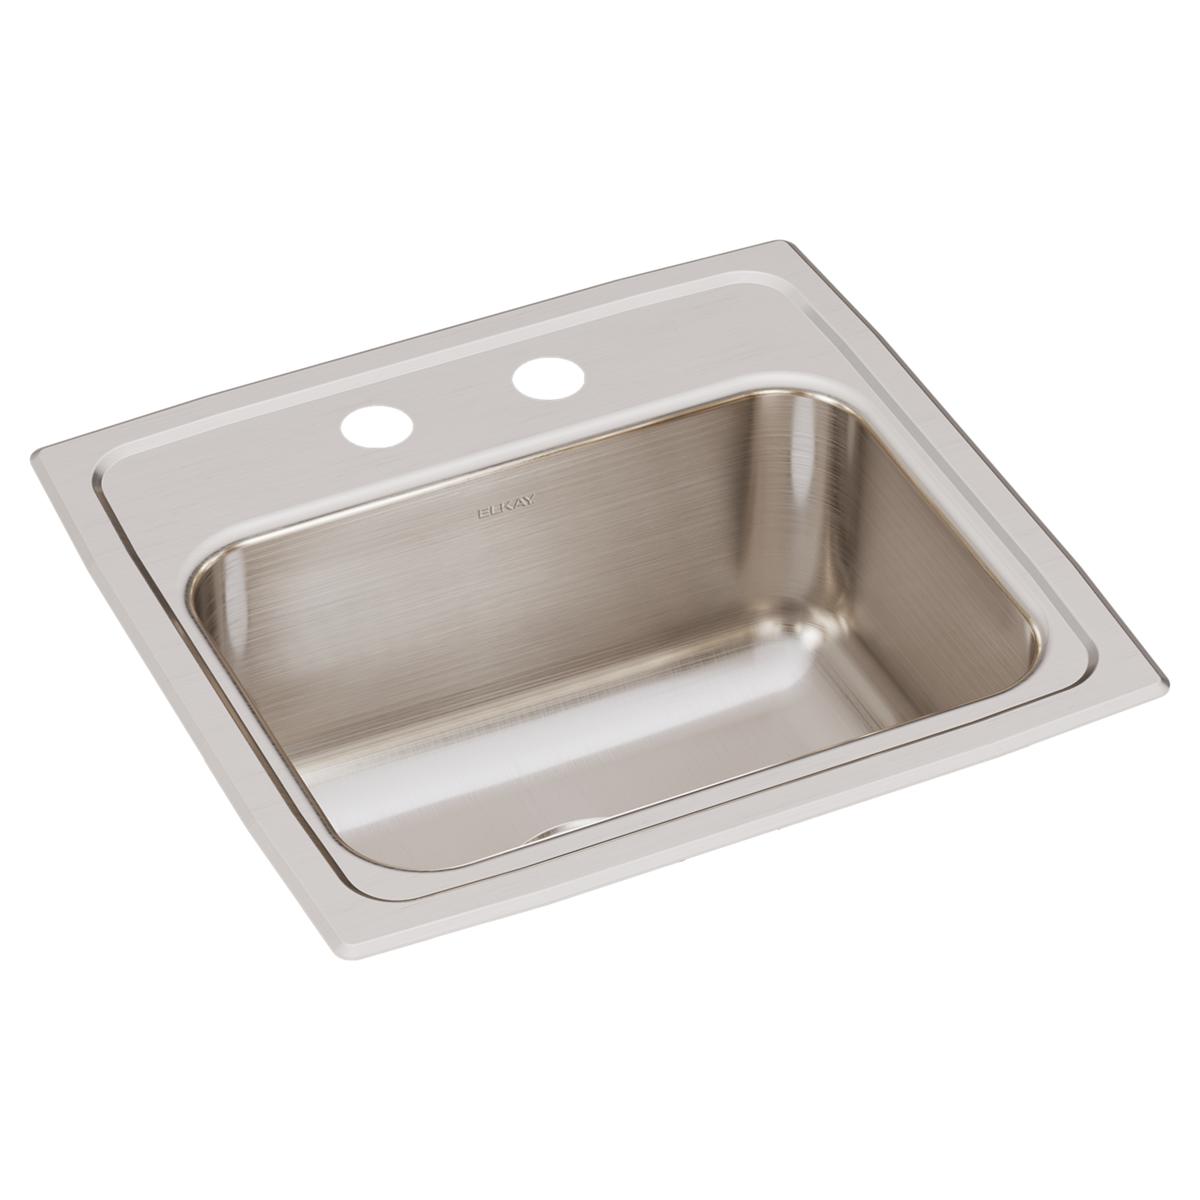 Elkay Lustertone Classic 17" x 16" x 7-5/8" Single Bowl Drop-in Sink with Quick-clip